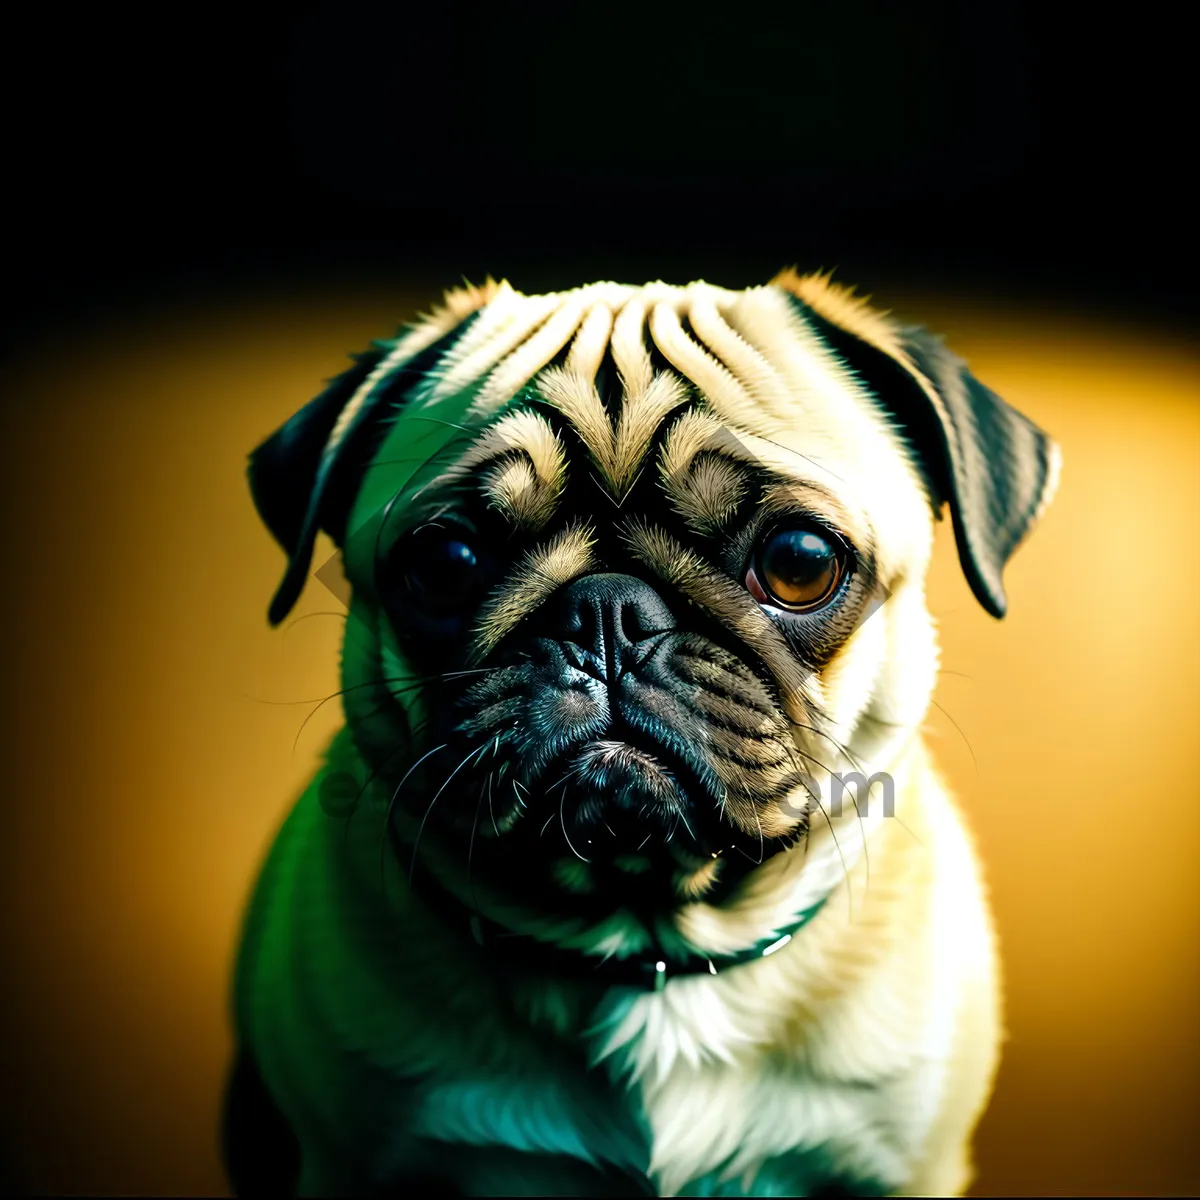 Picture of Adorable Wrinkled Pug Bull Portrait: Cute Purebred Canine Friend